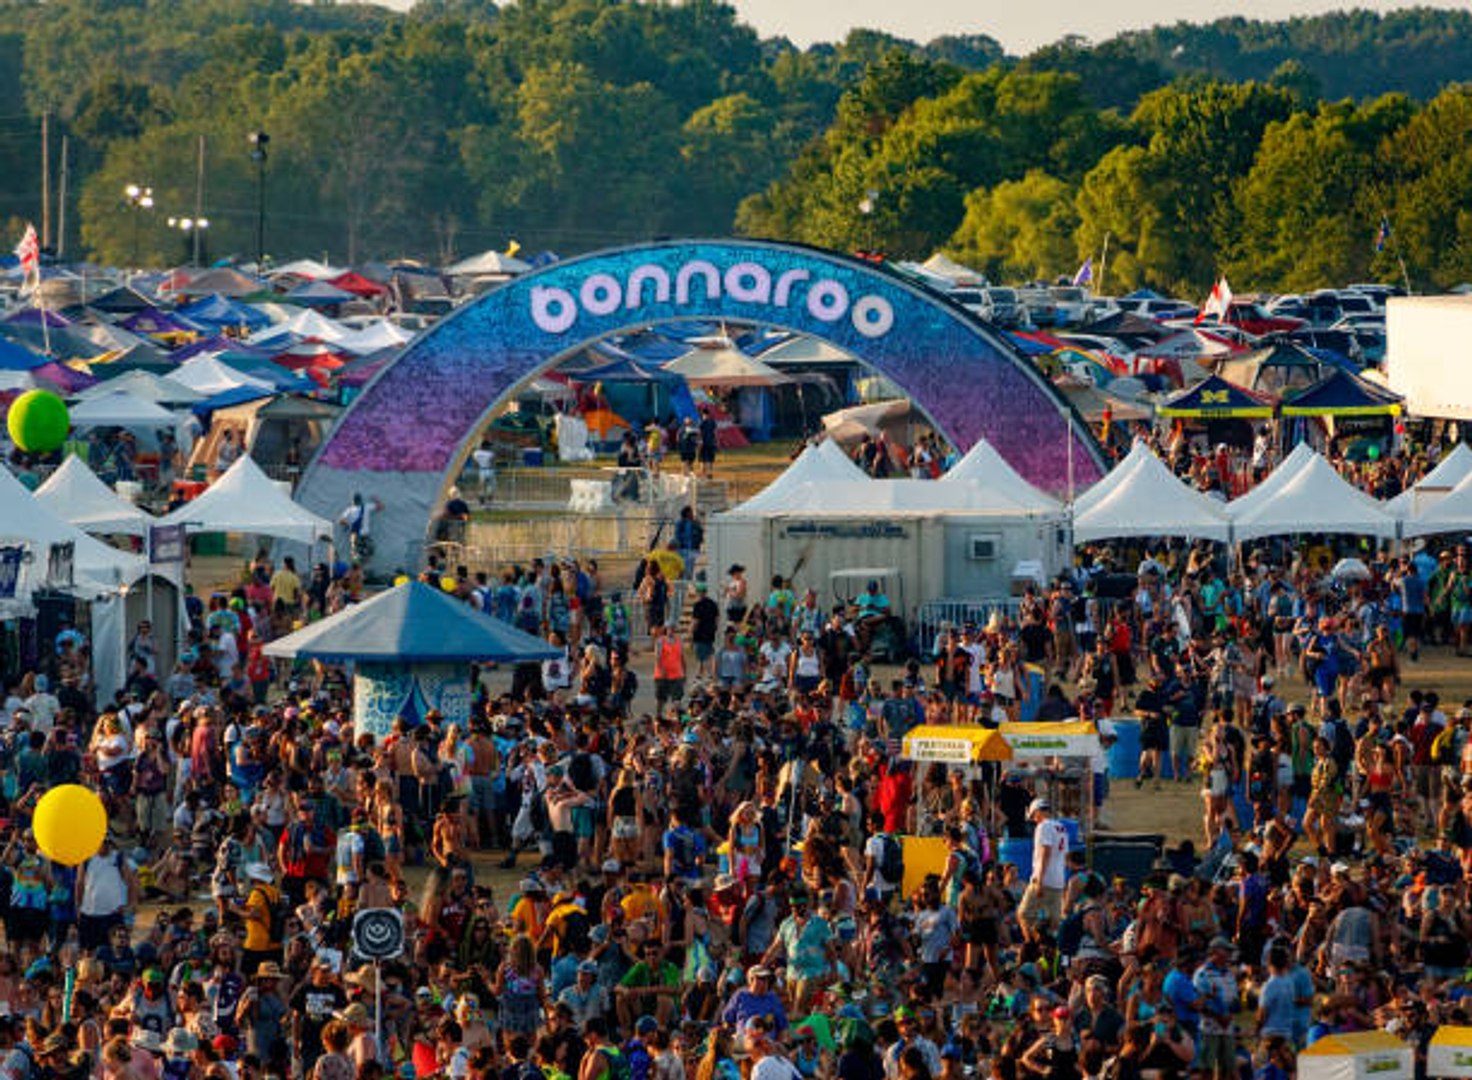 The 2020 Bonnaroo Lineup Is Here